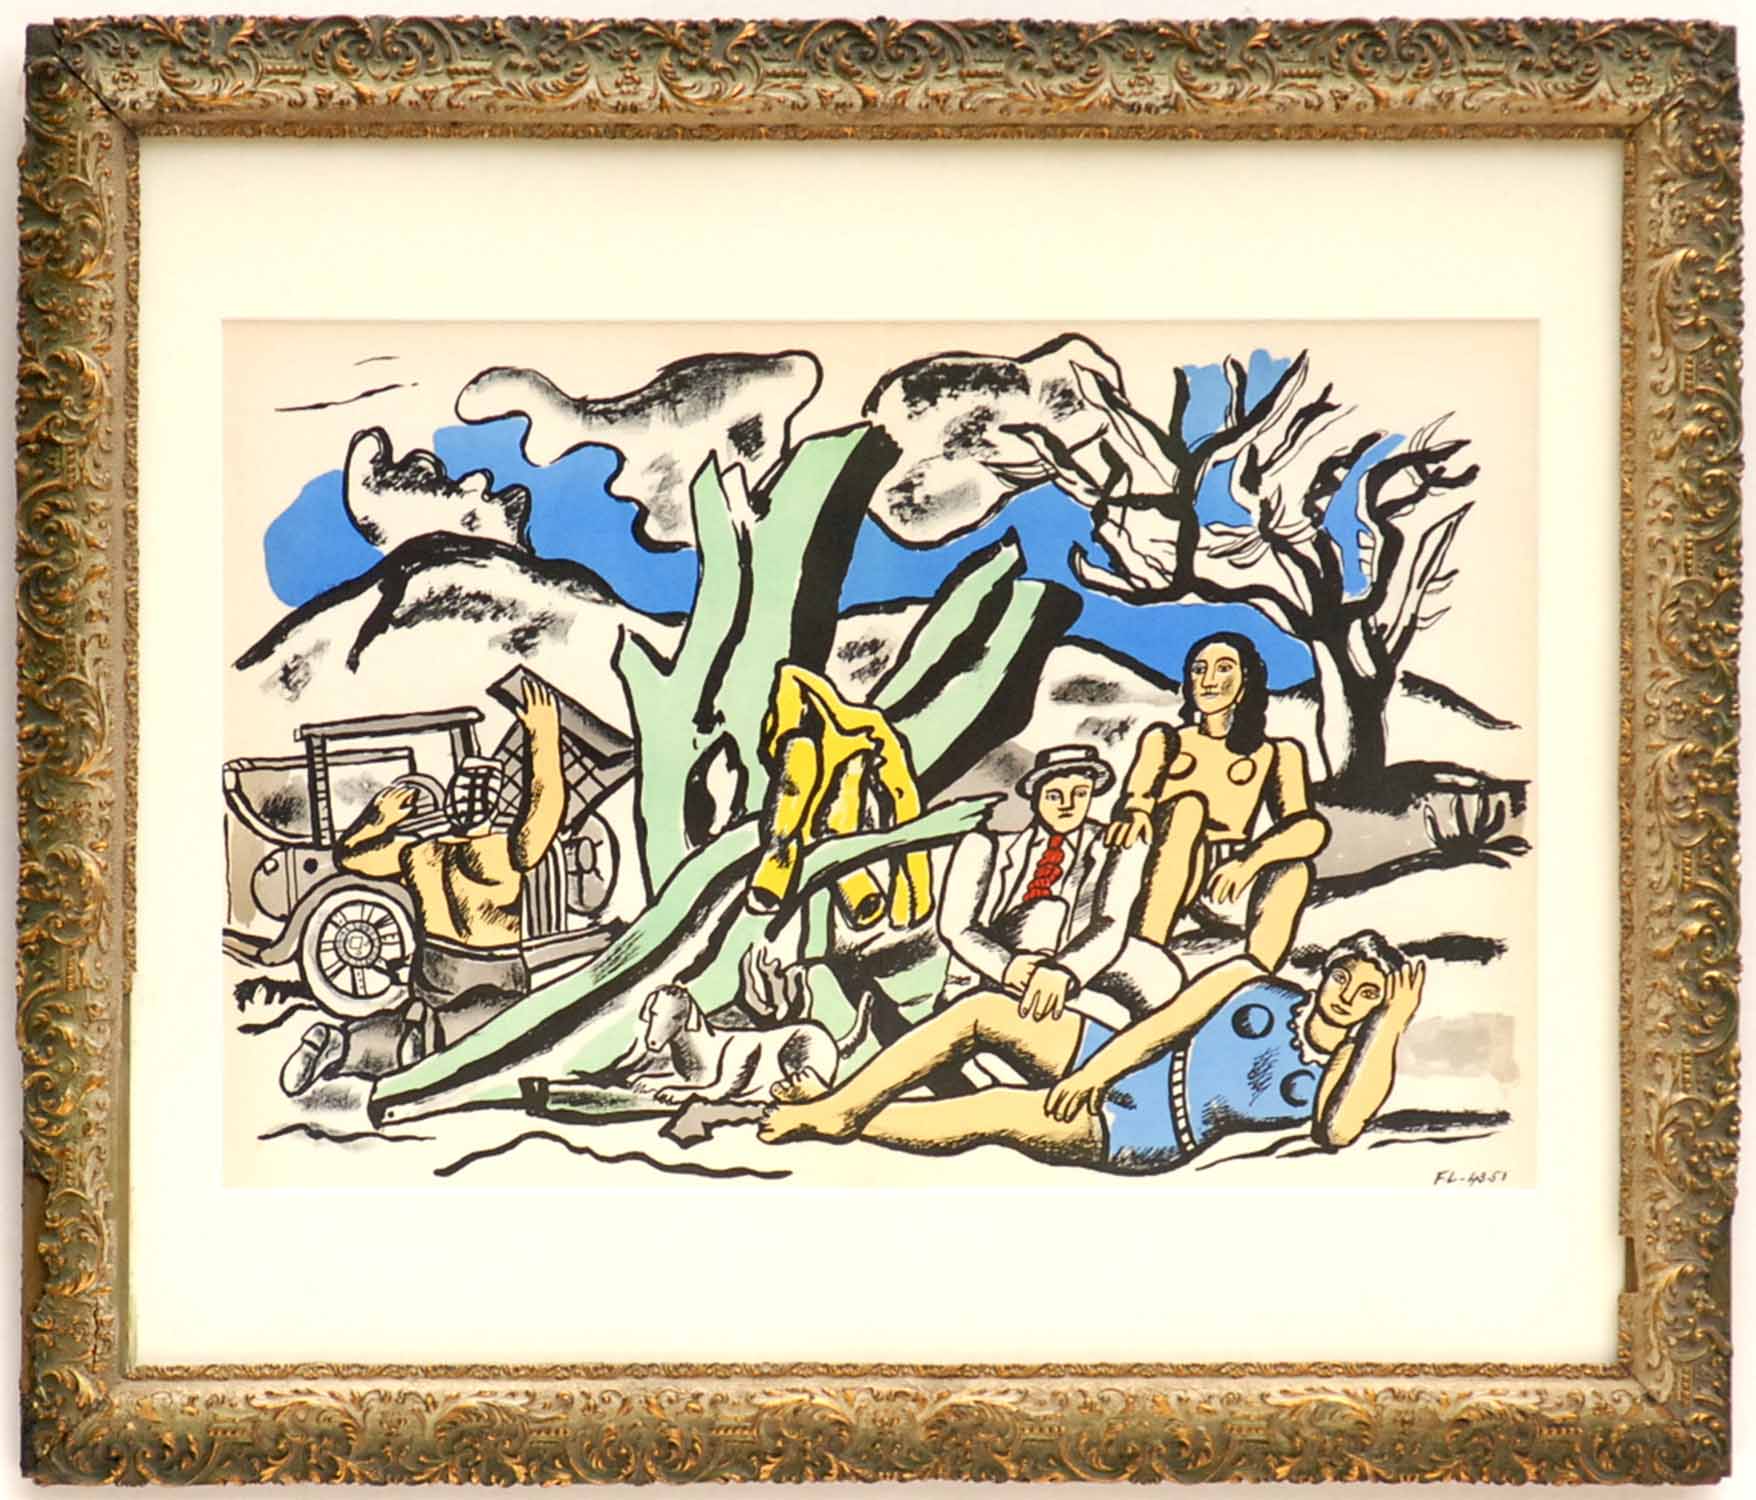 FERNAND LEGER 'La Partie de Campagne', lithograph, signed in the plate, 1952, printed by Mourlot,